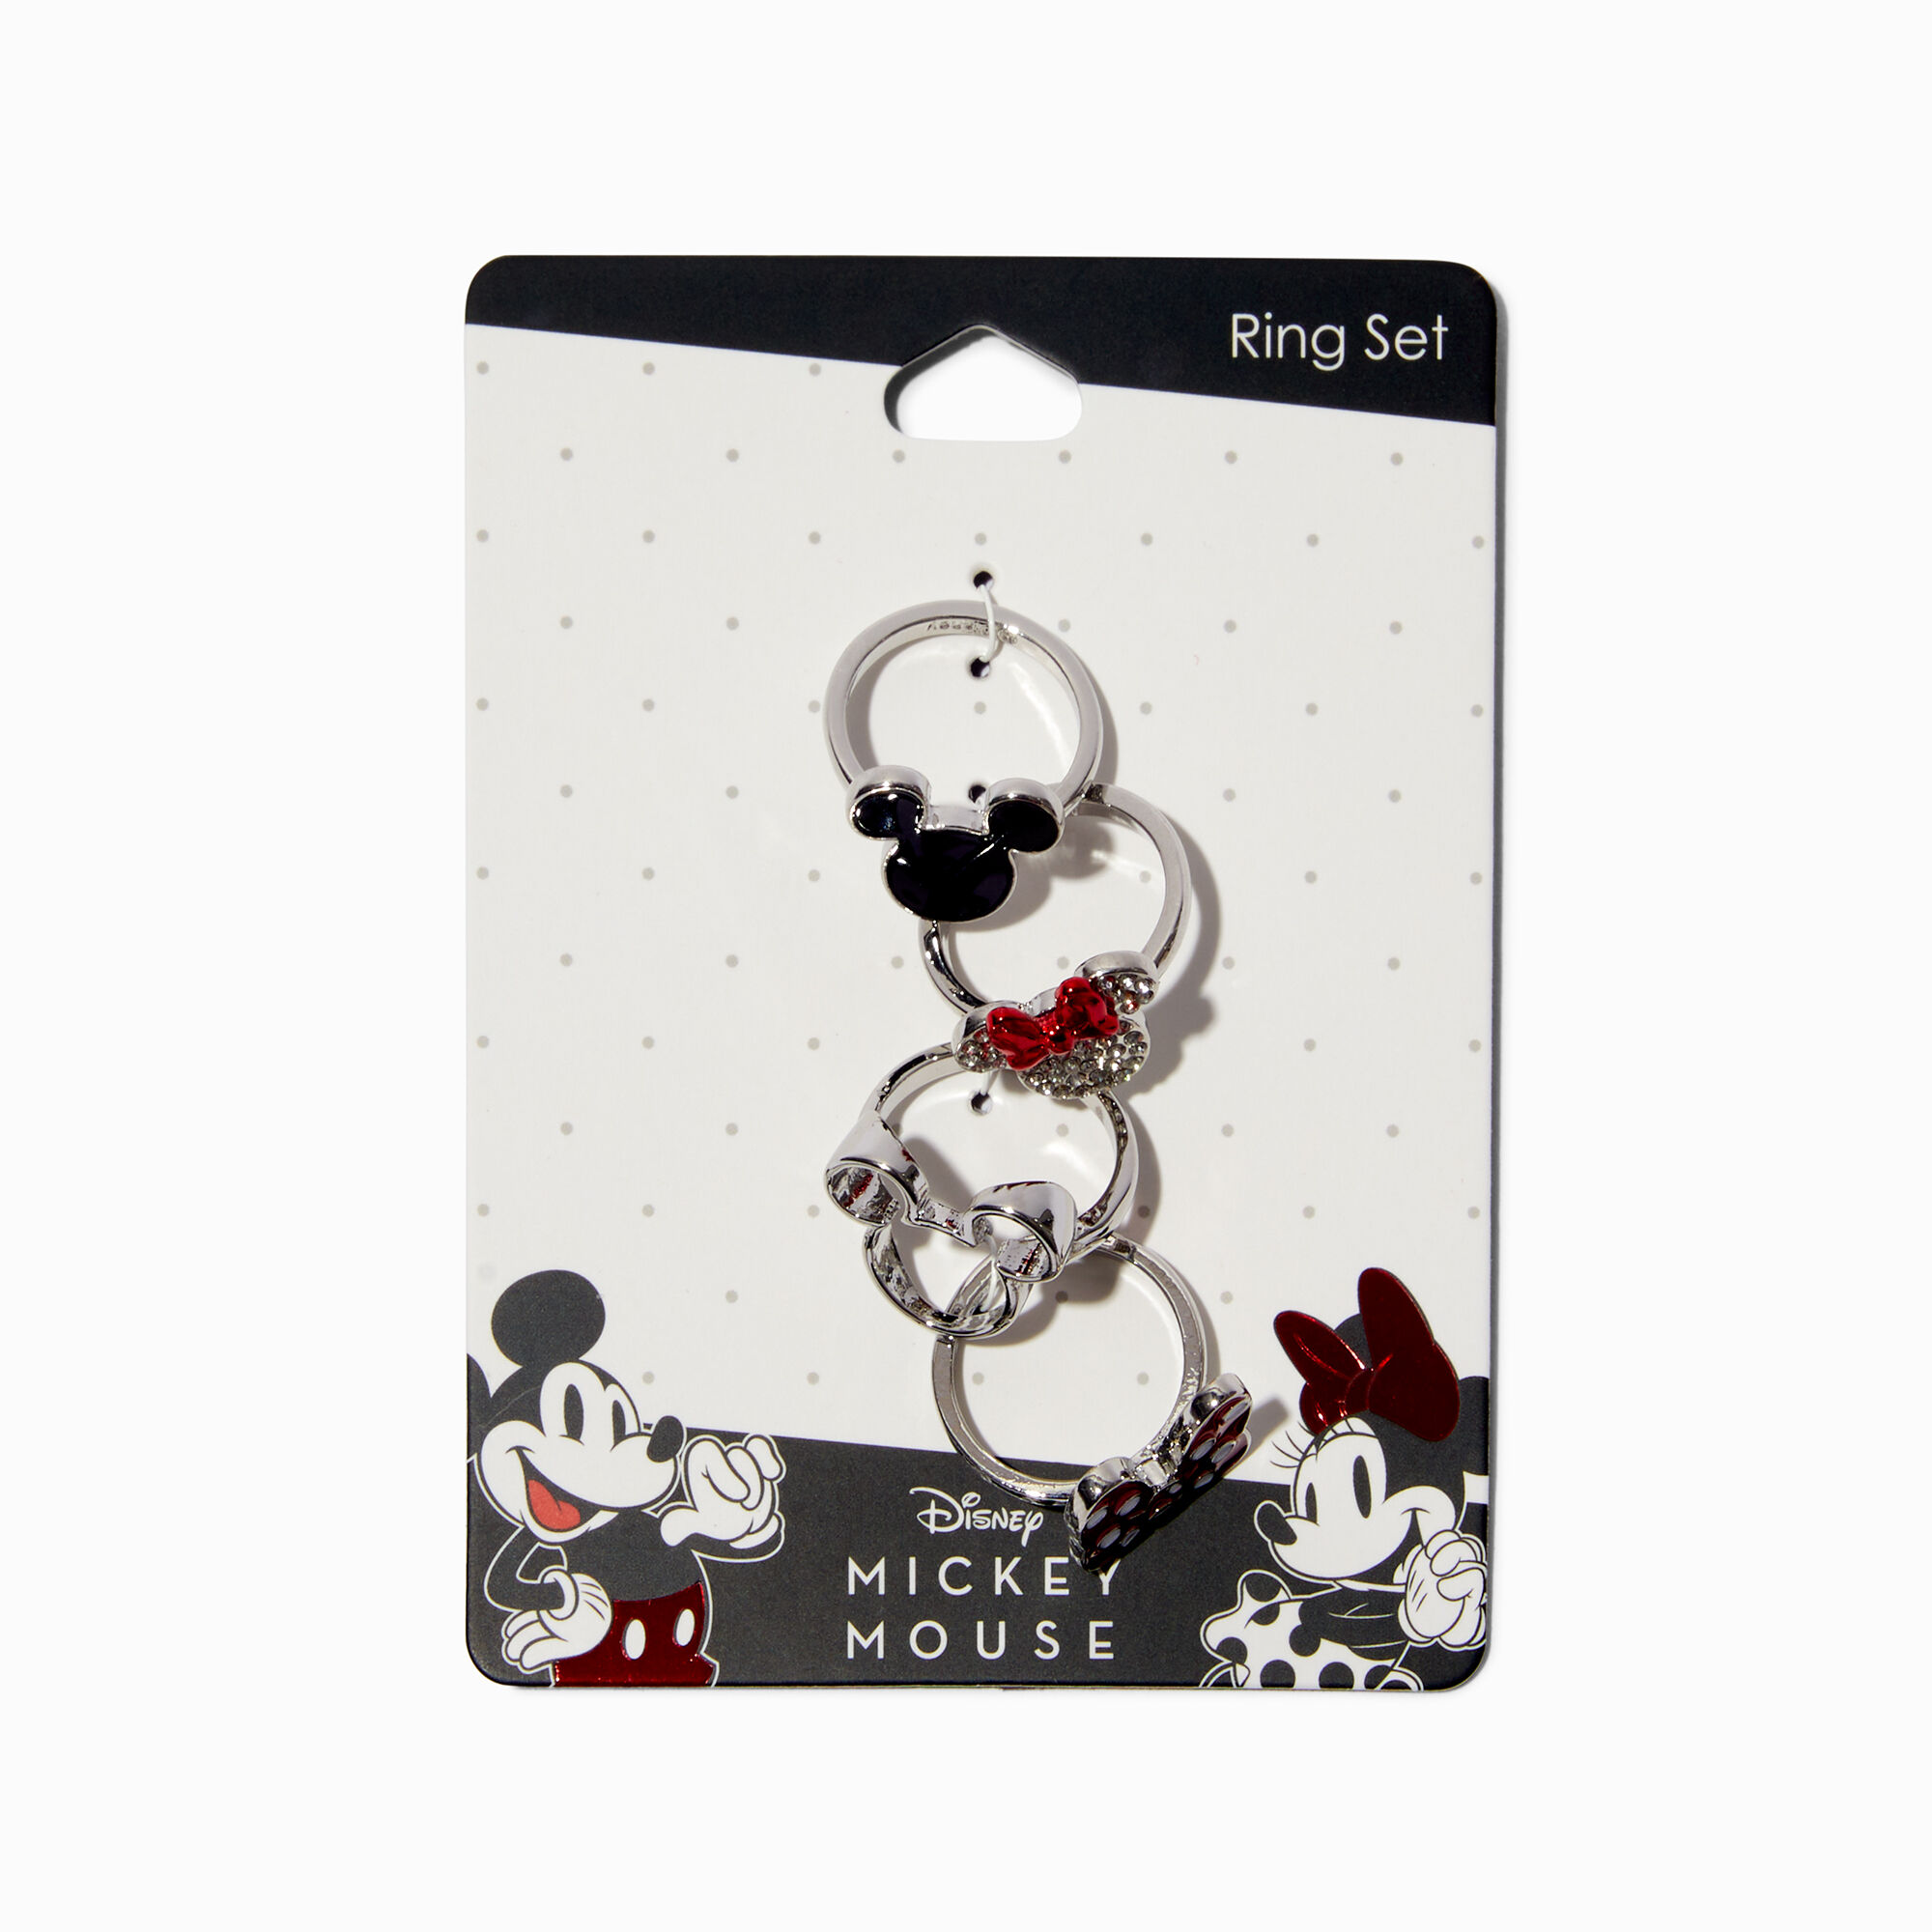 View Claires Disney 100 Mickey Mouse Ring Set 4 Pack information